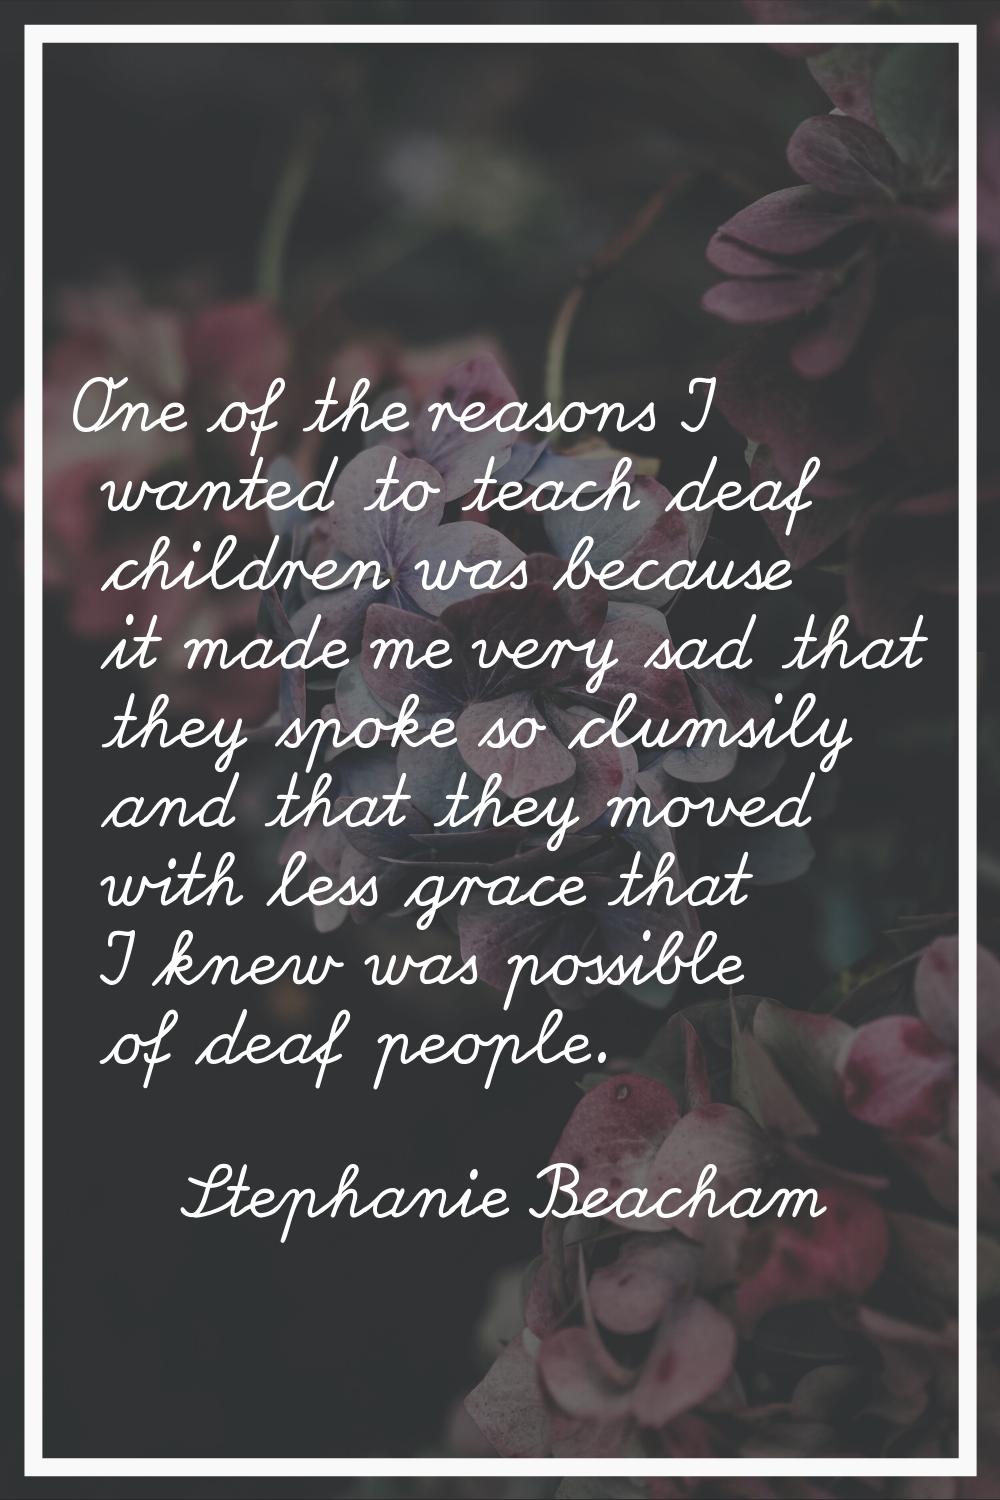 One of the reasons I wanted to teach deaf children was because it made me very sad that they spoke 